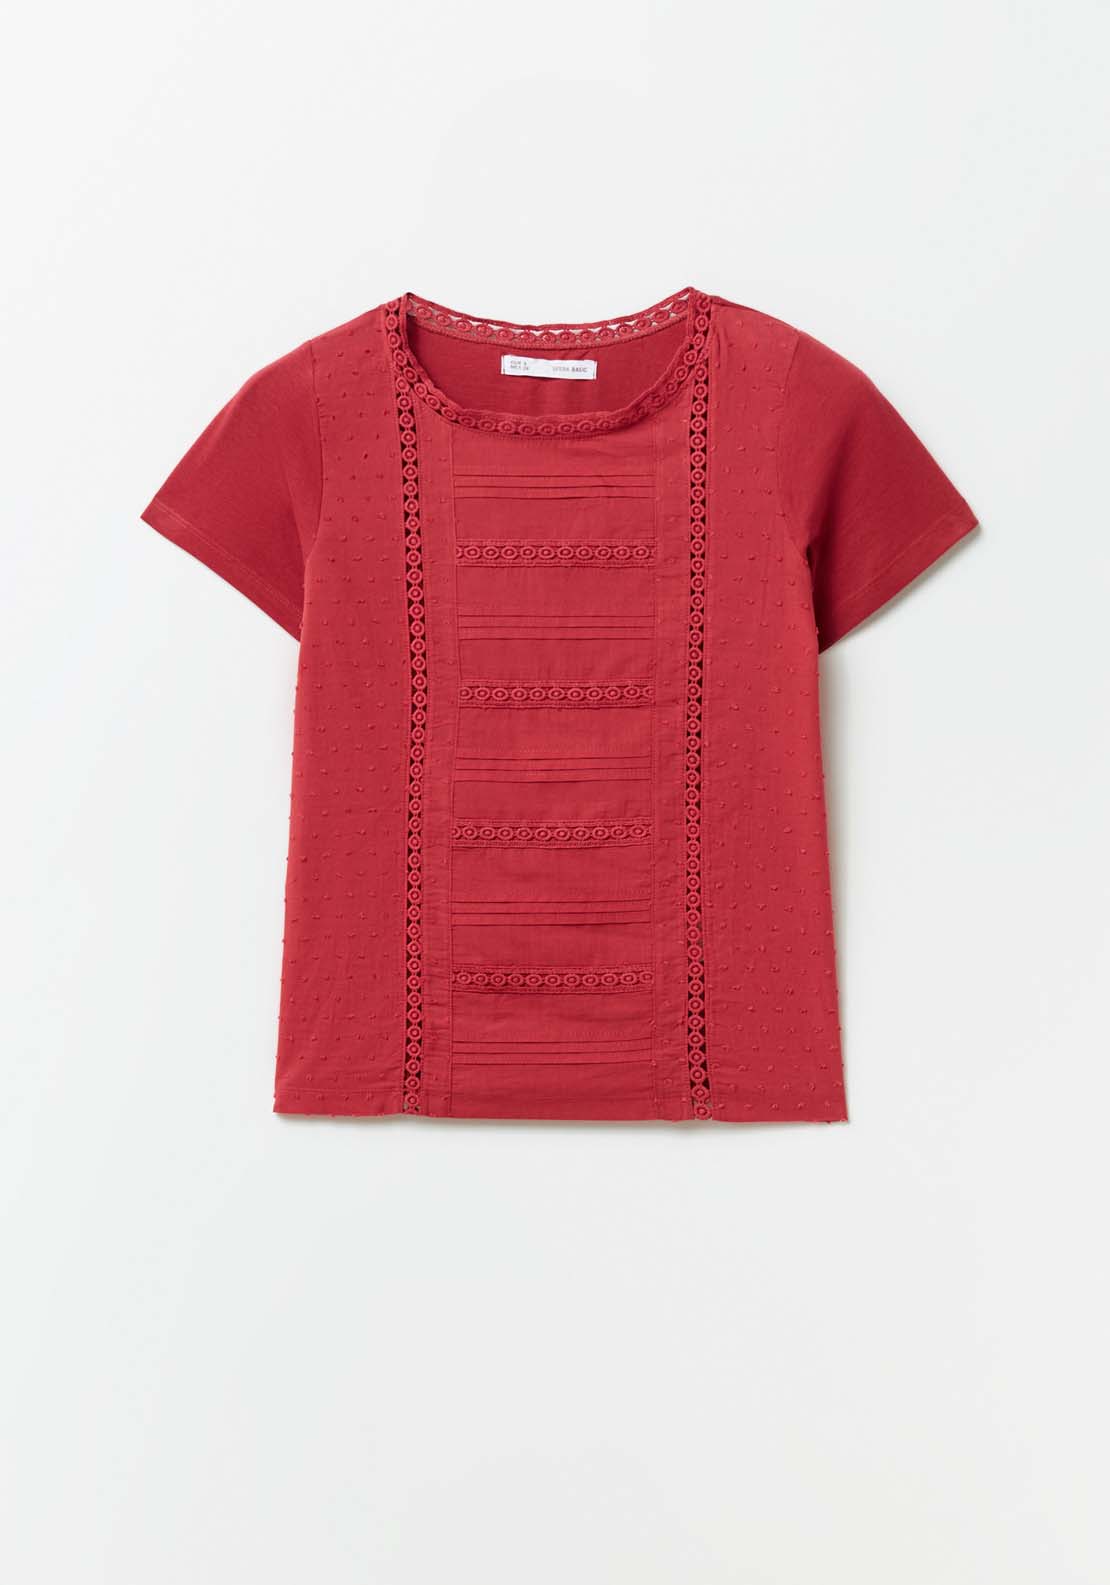 Sfera Short Sleeve Top - Red 5 Shaws Department Stores